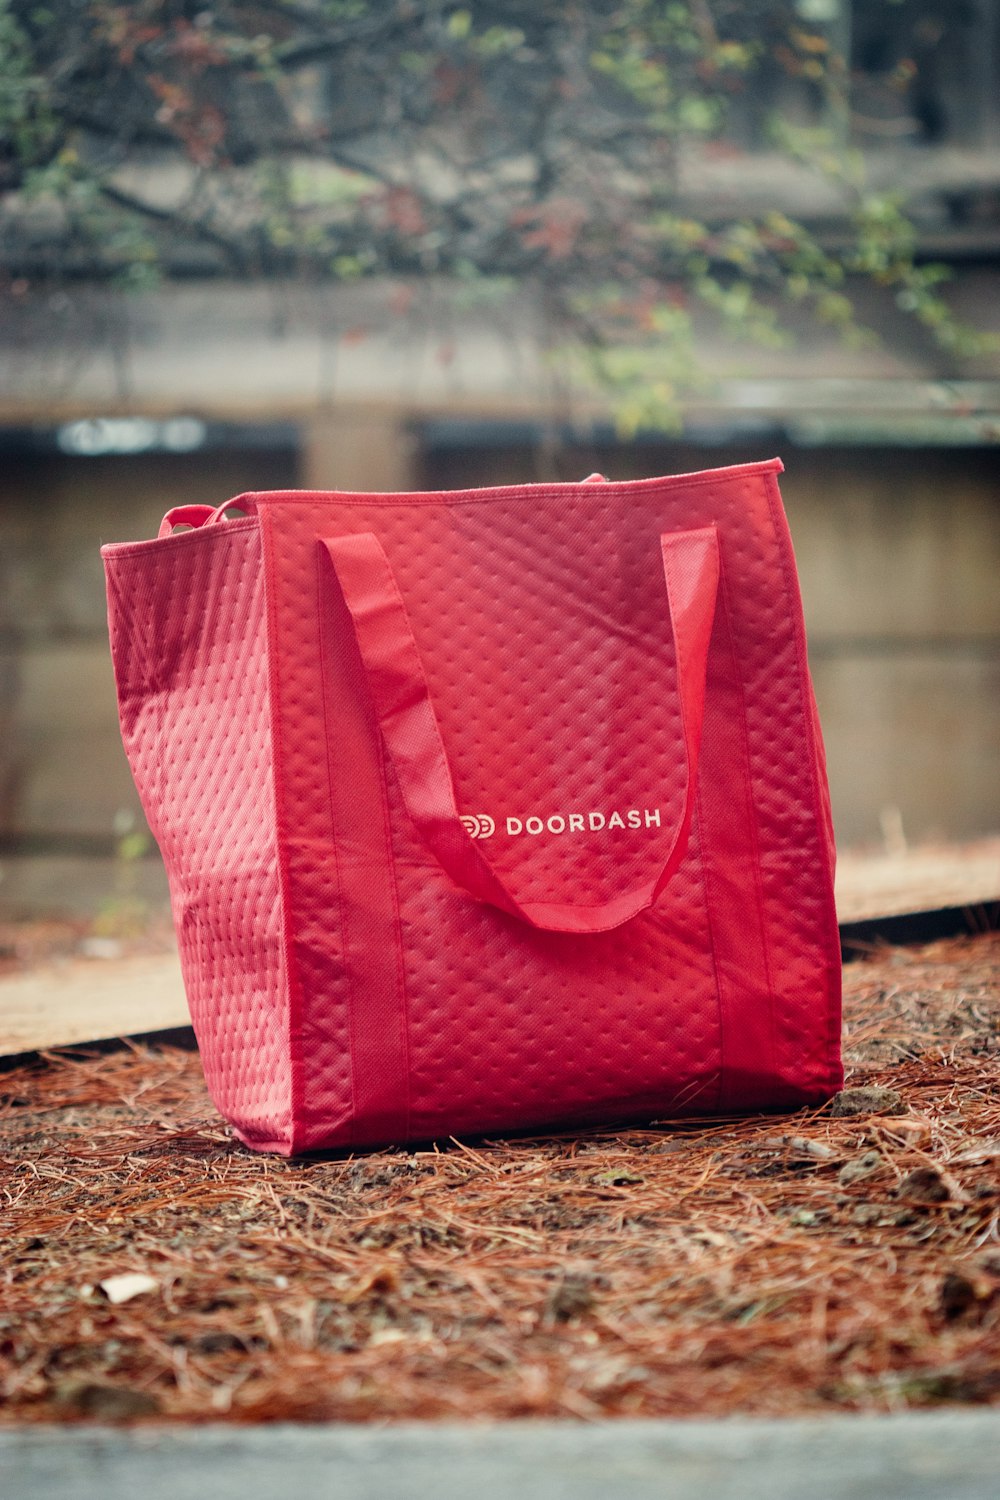 White and red Supreme X Louis Vuitton duffel bag photo – Free Style Image  on Unsplash